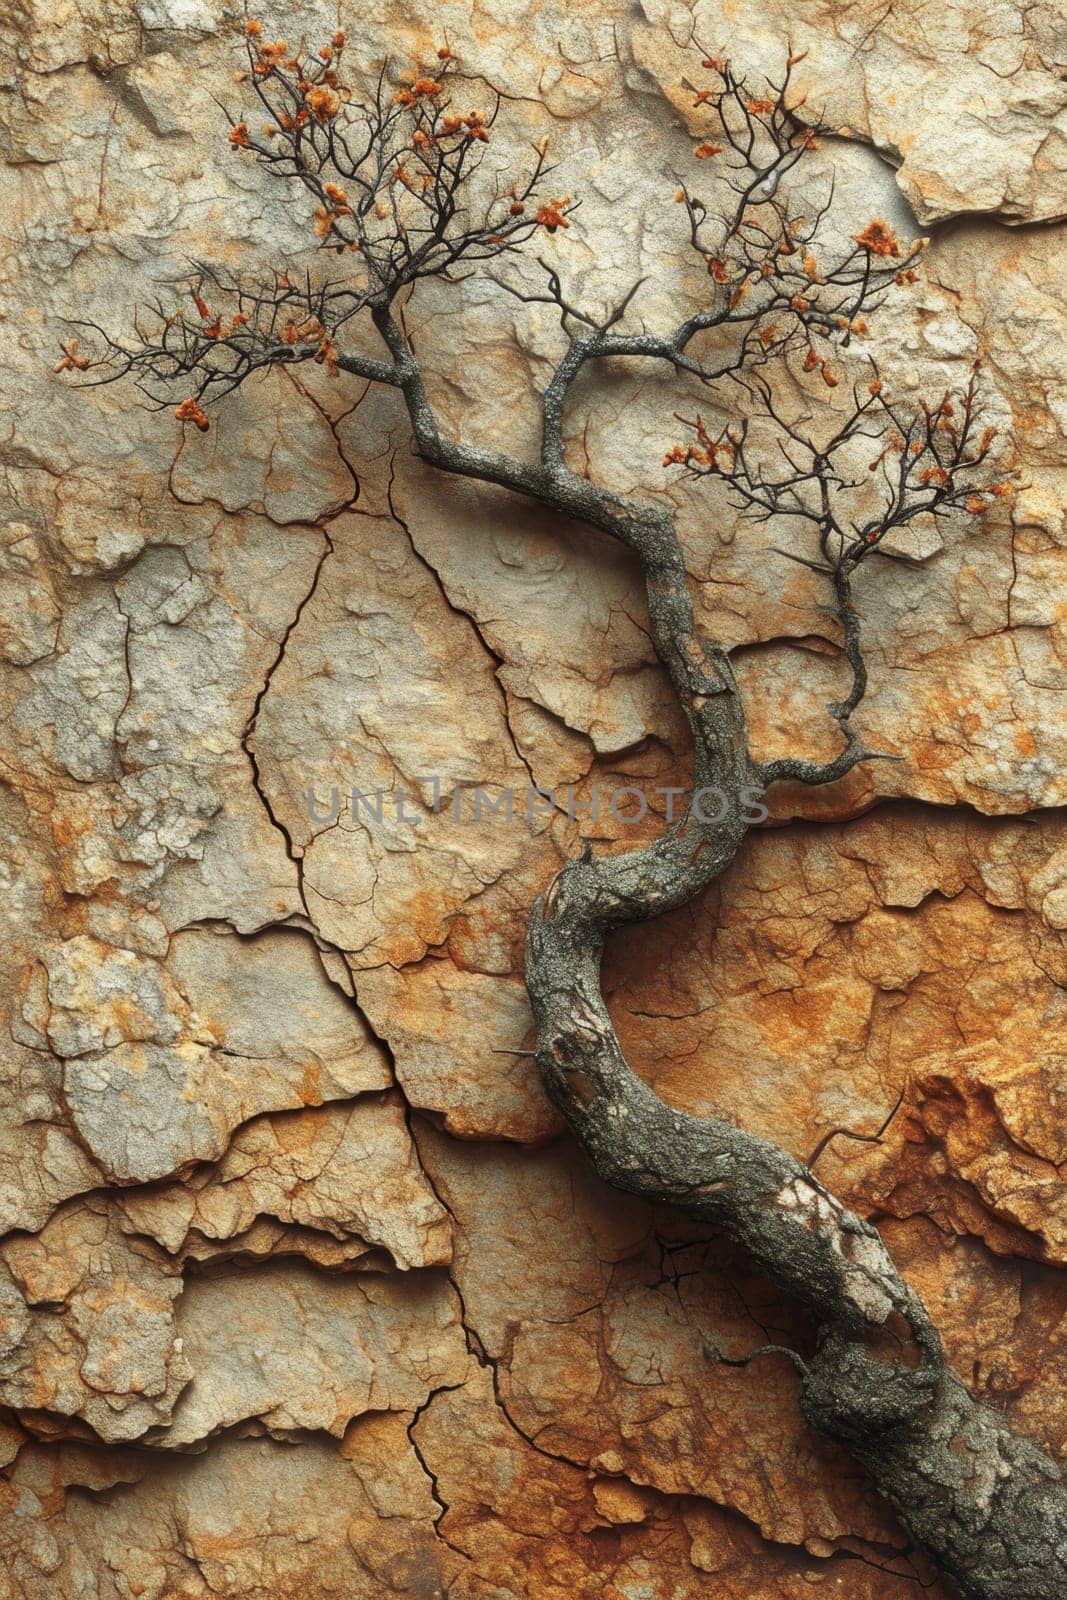 A tree growing on a rock. The roots are breaking through the rocks.